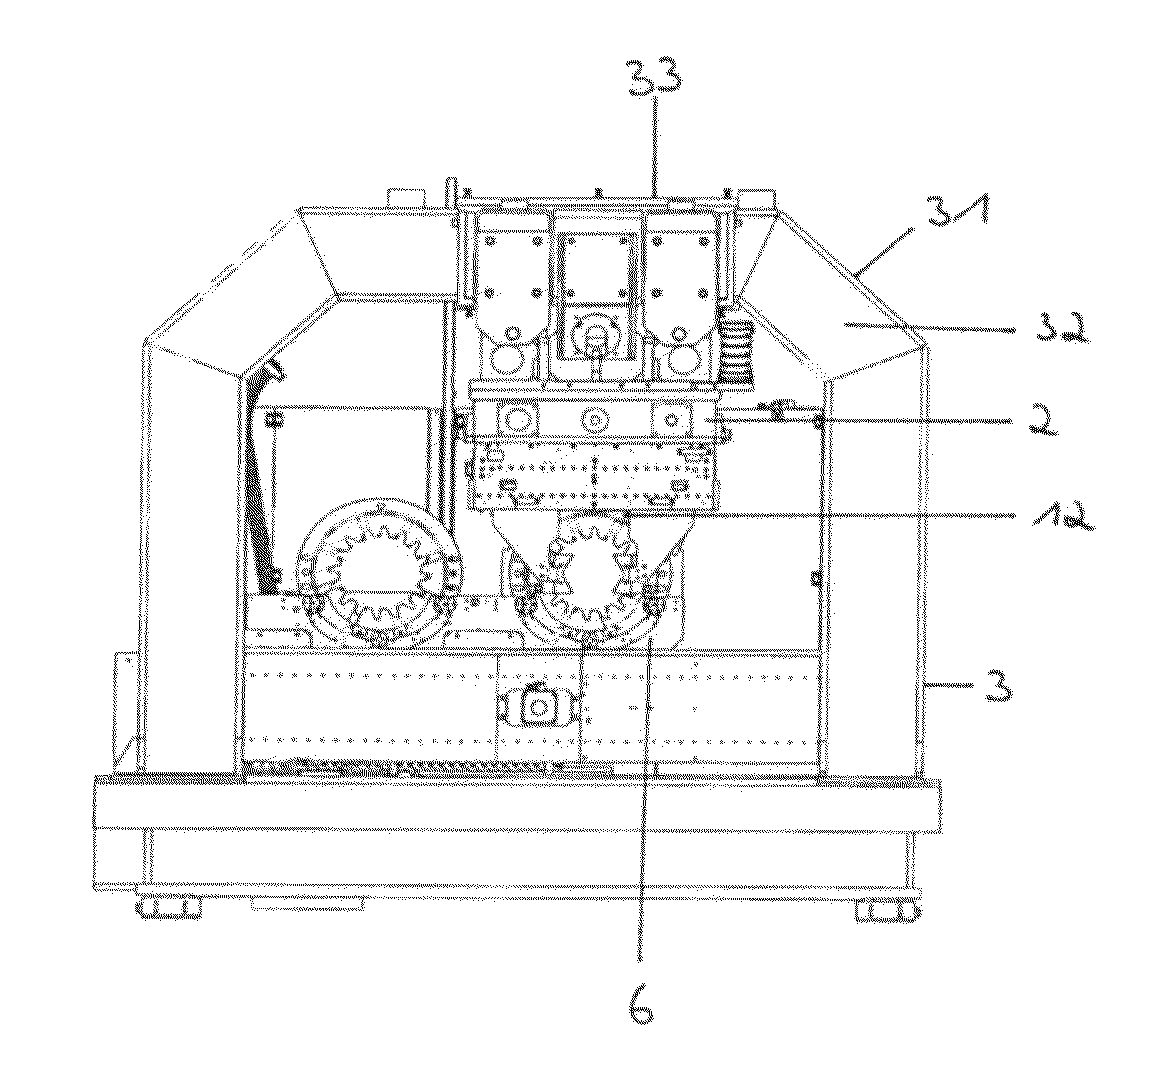 Whirling cutting device